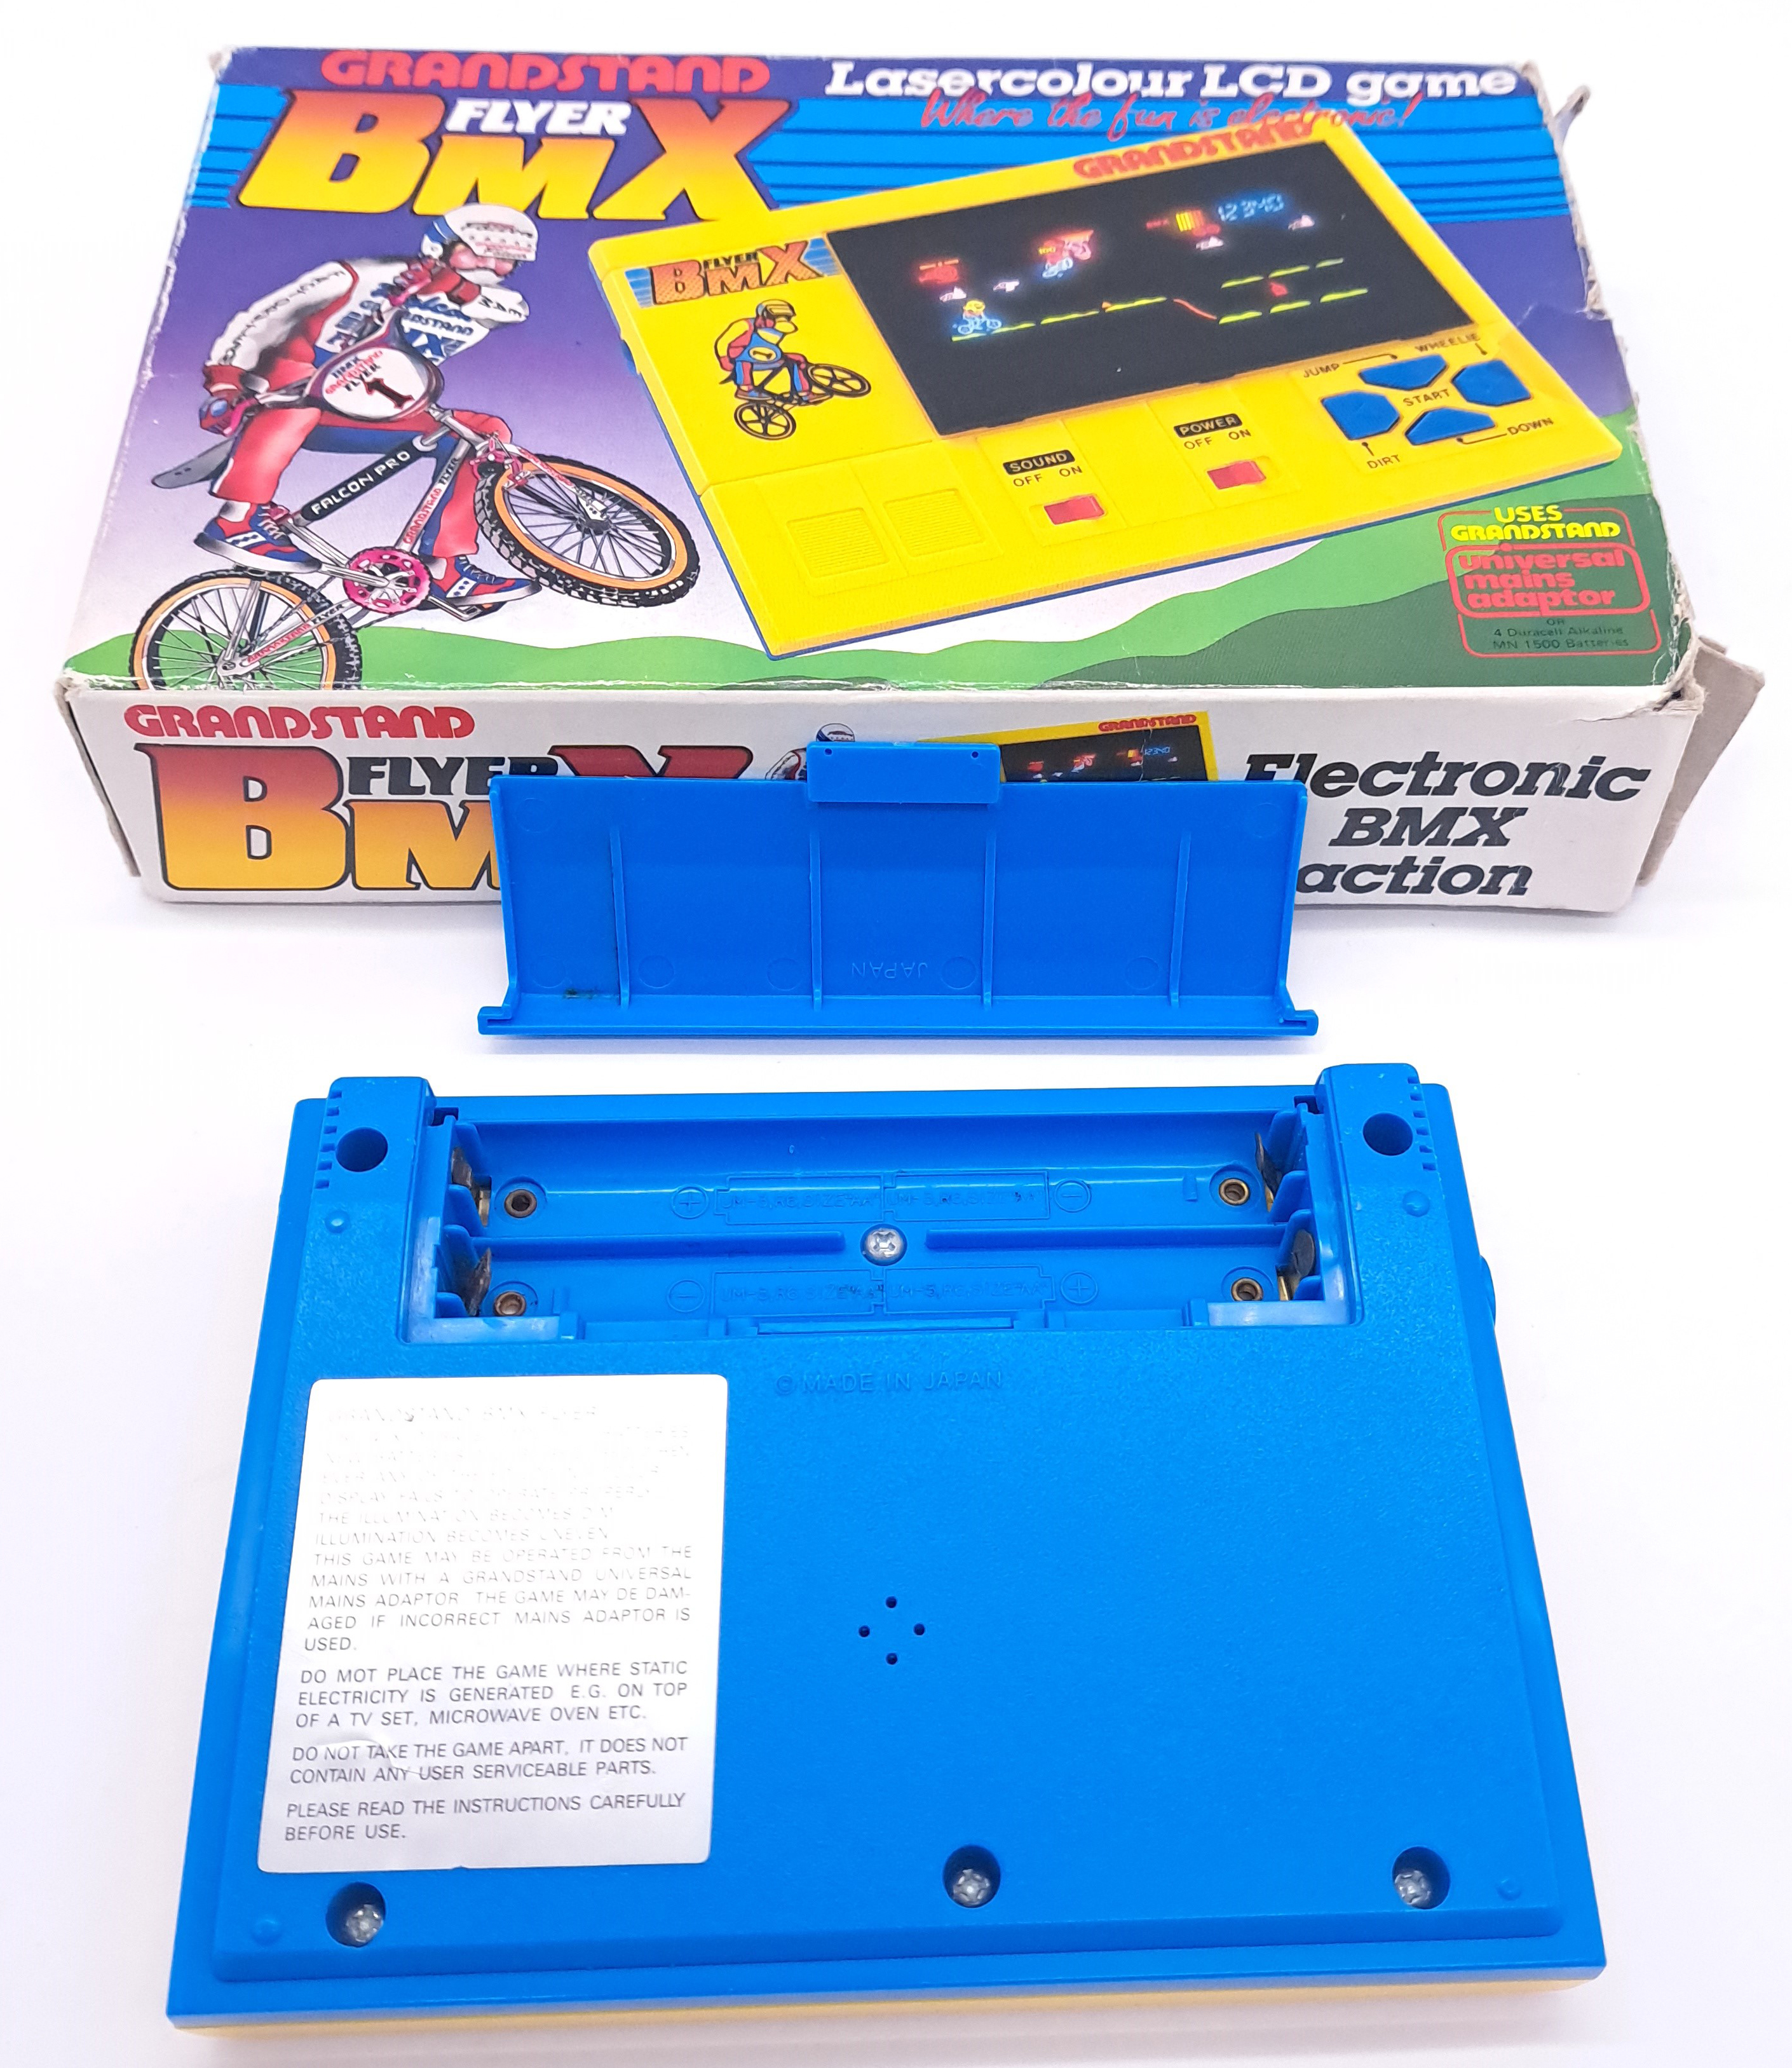 Vintage/Retro Gaming. Grandstand "BMX Flyer" 1983 Handheld  Lasercolour Game Console - Image 6 of 6